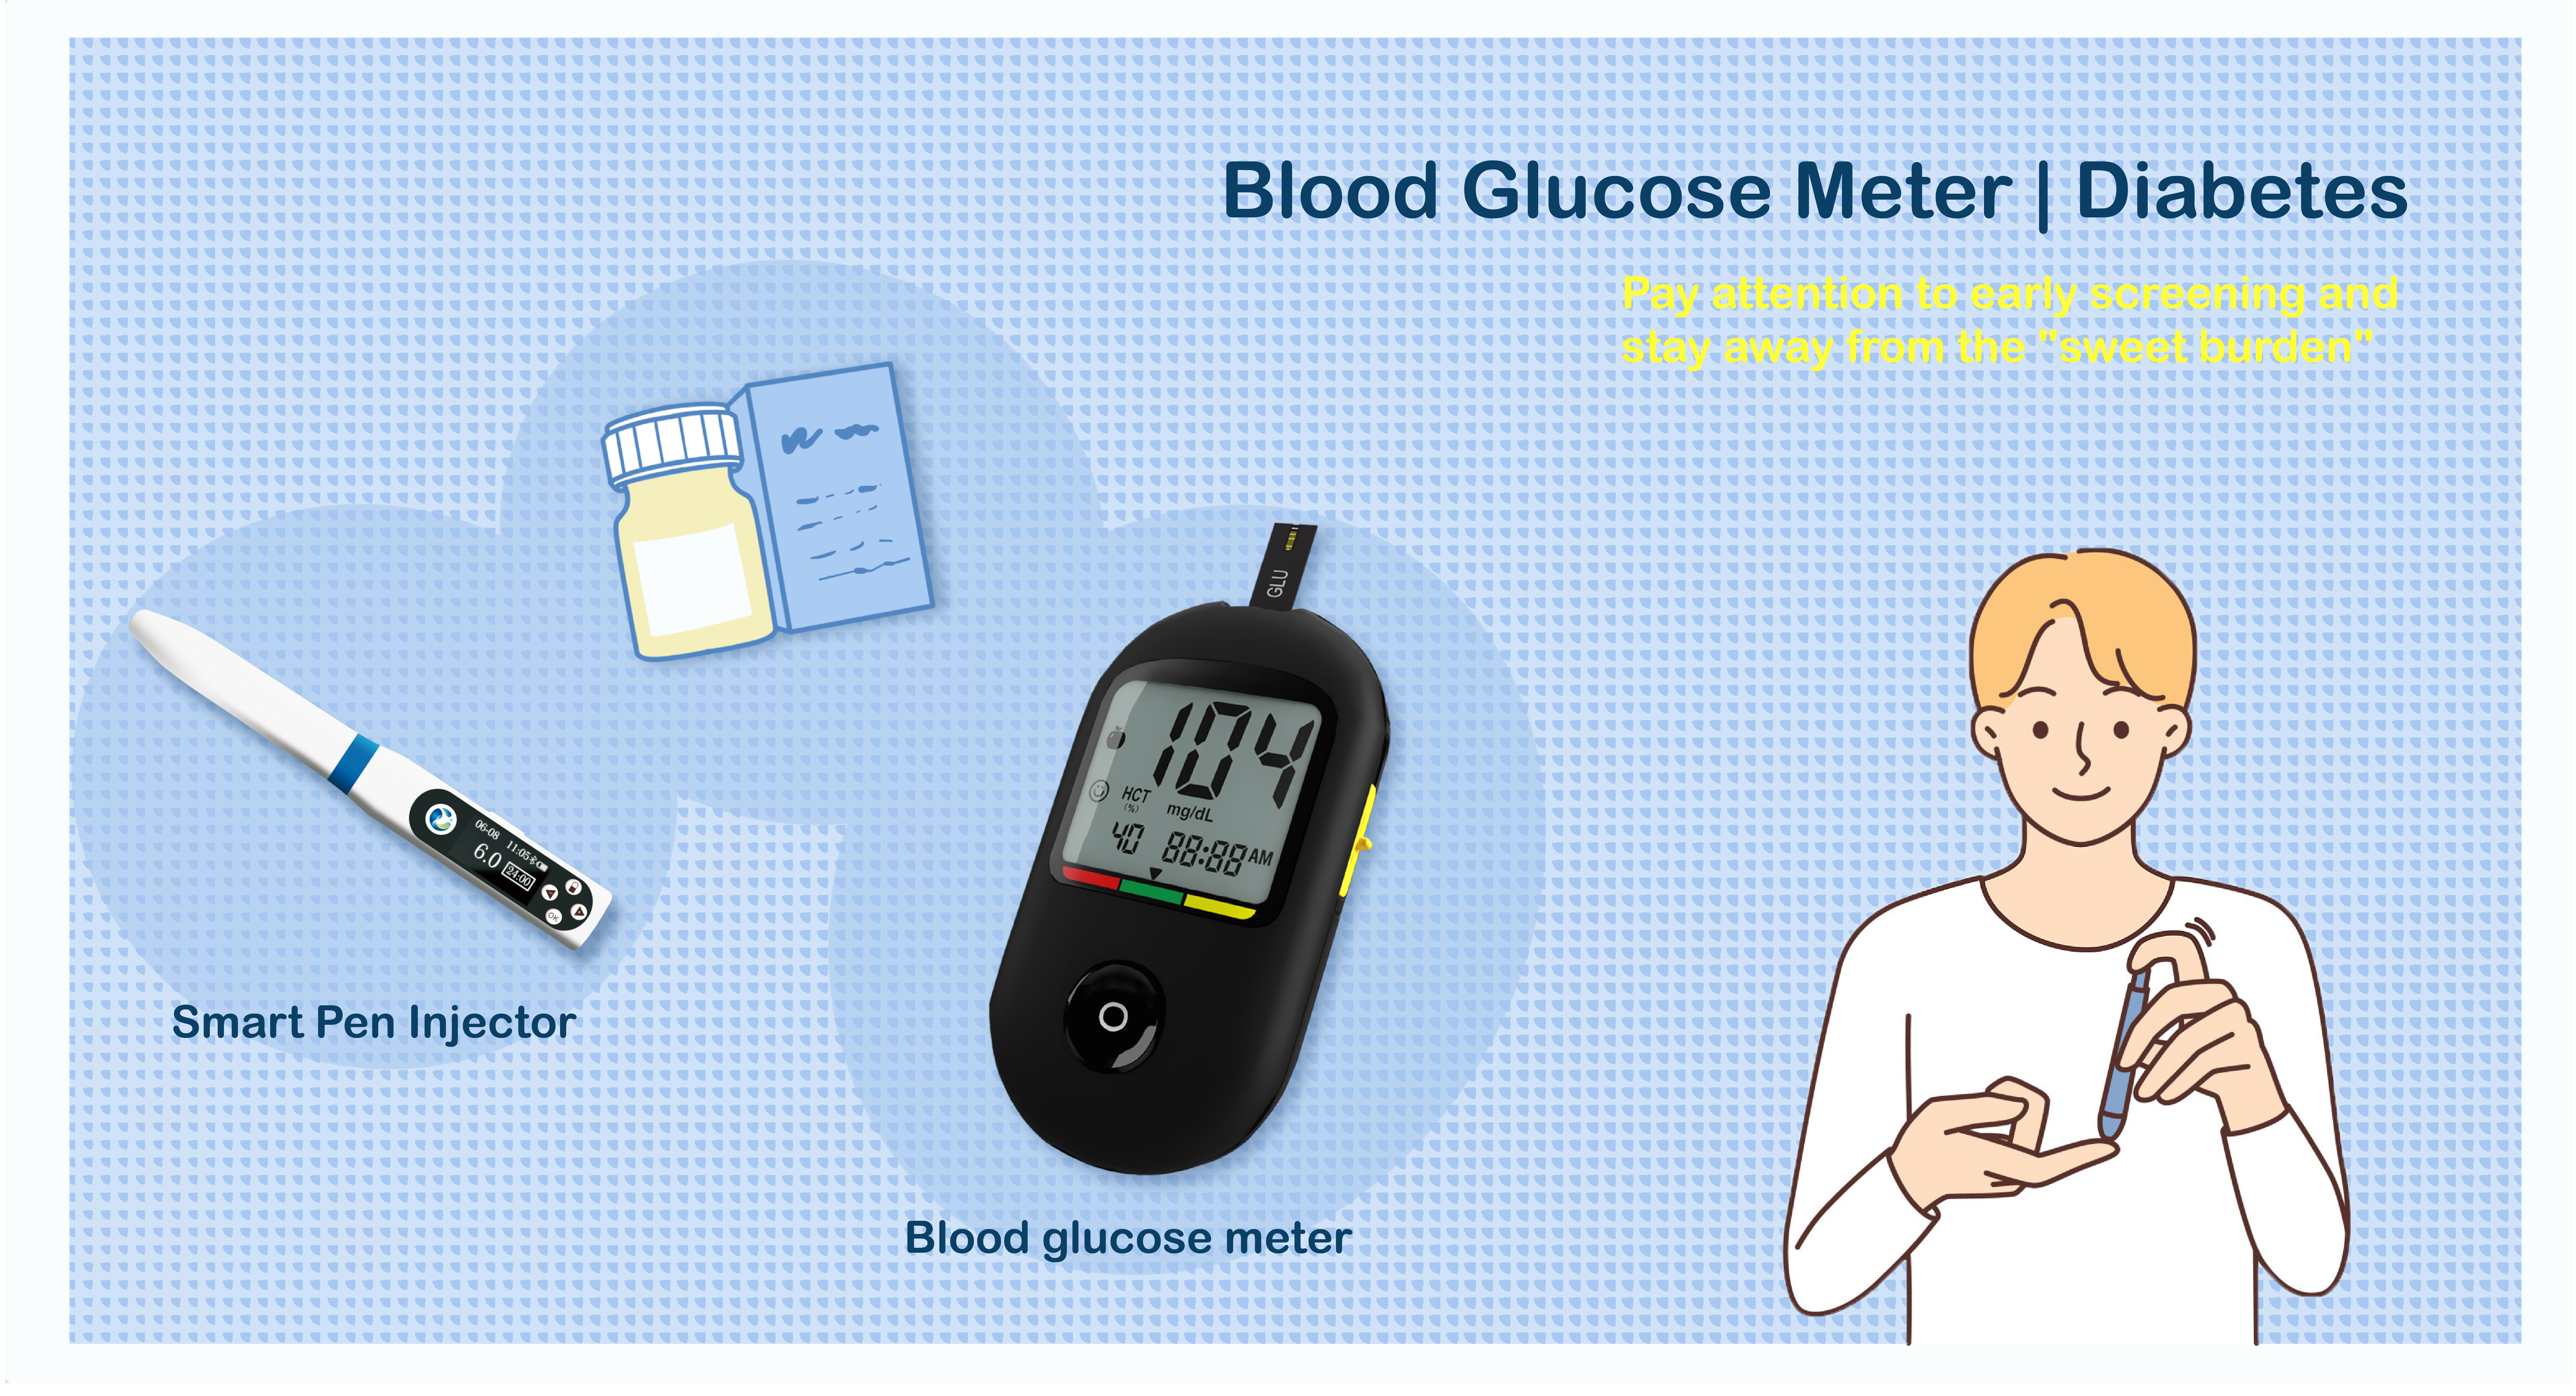 https://www.sejoy.com/blood-glucose-monitoring-system-710-product/